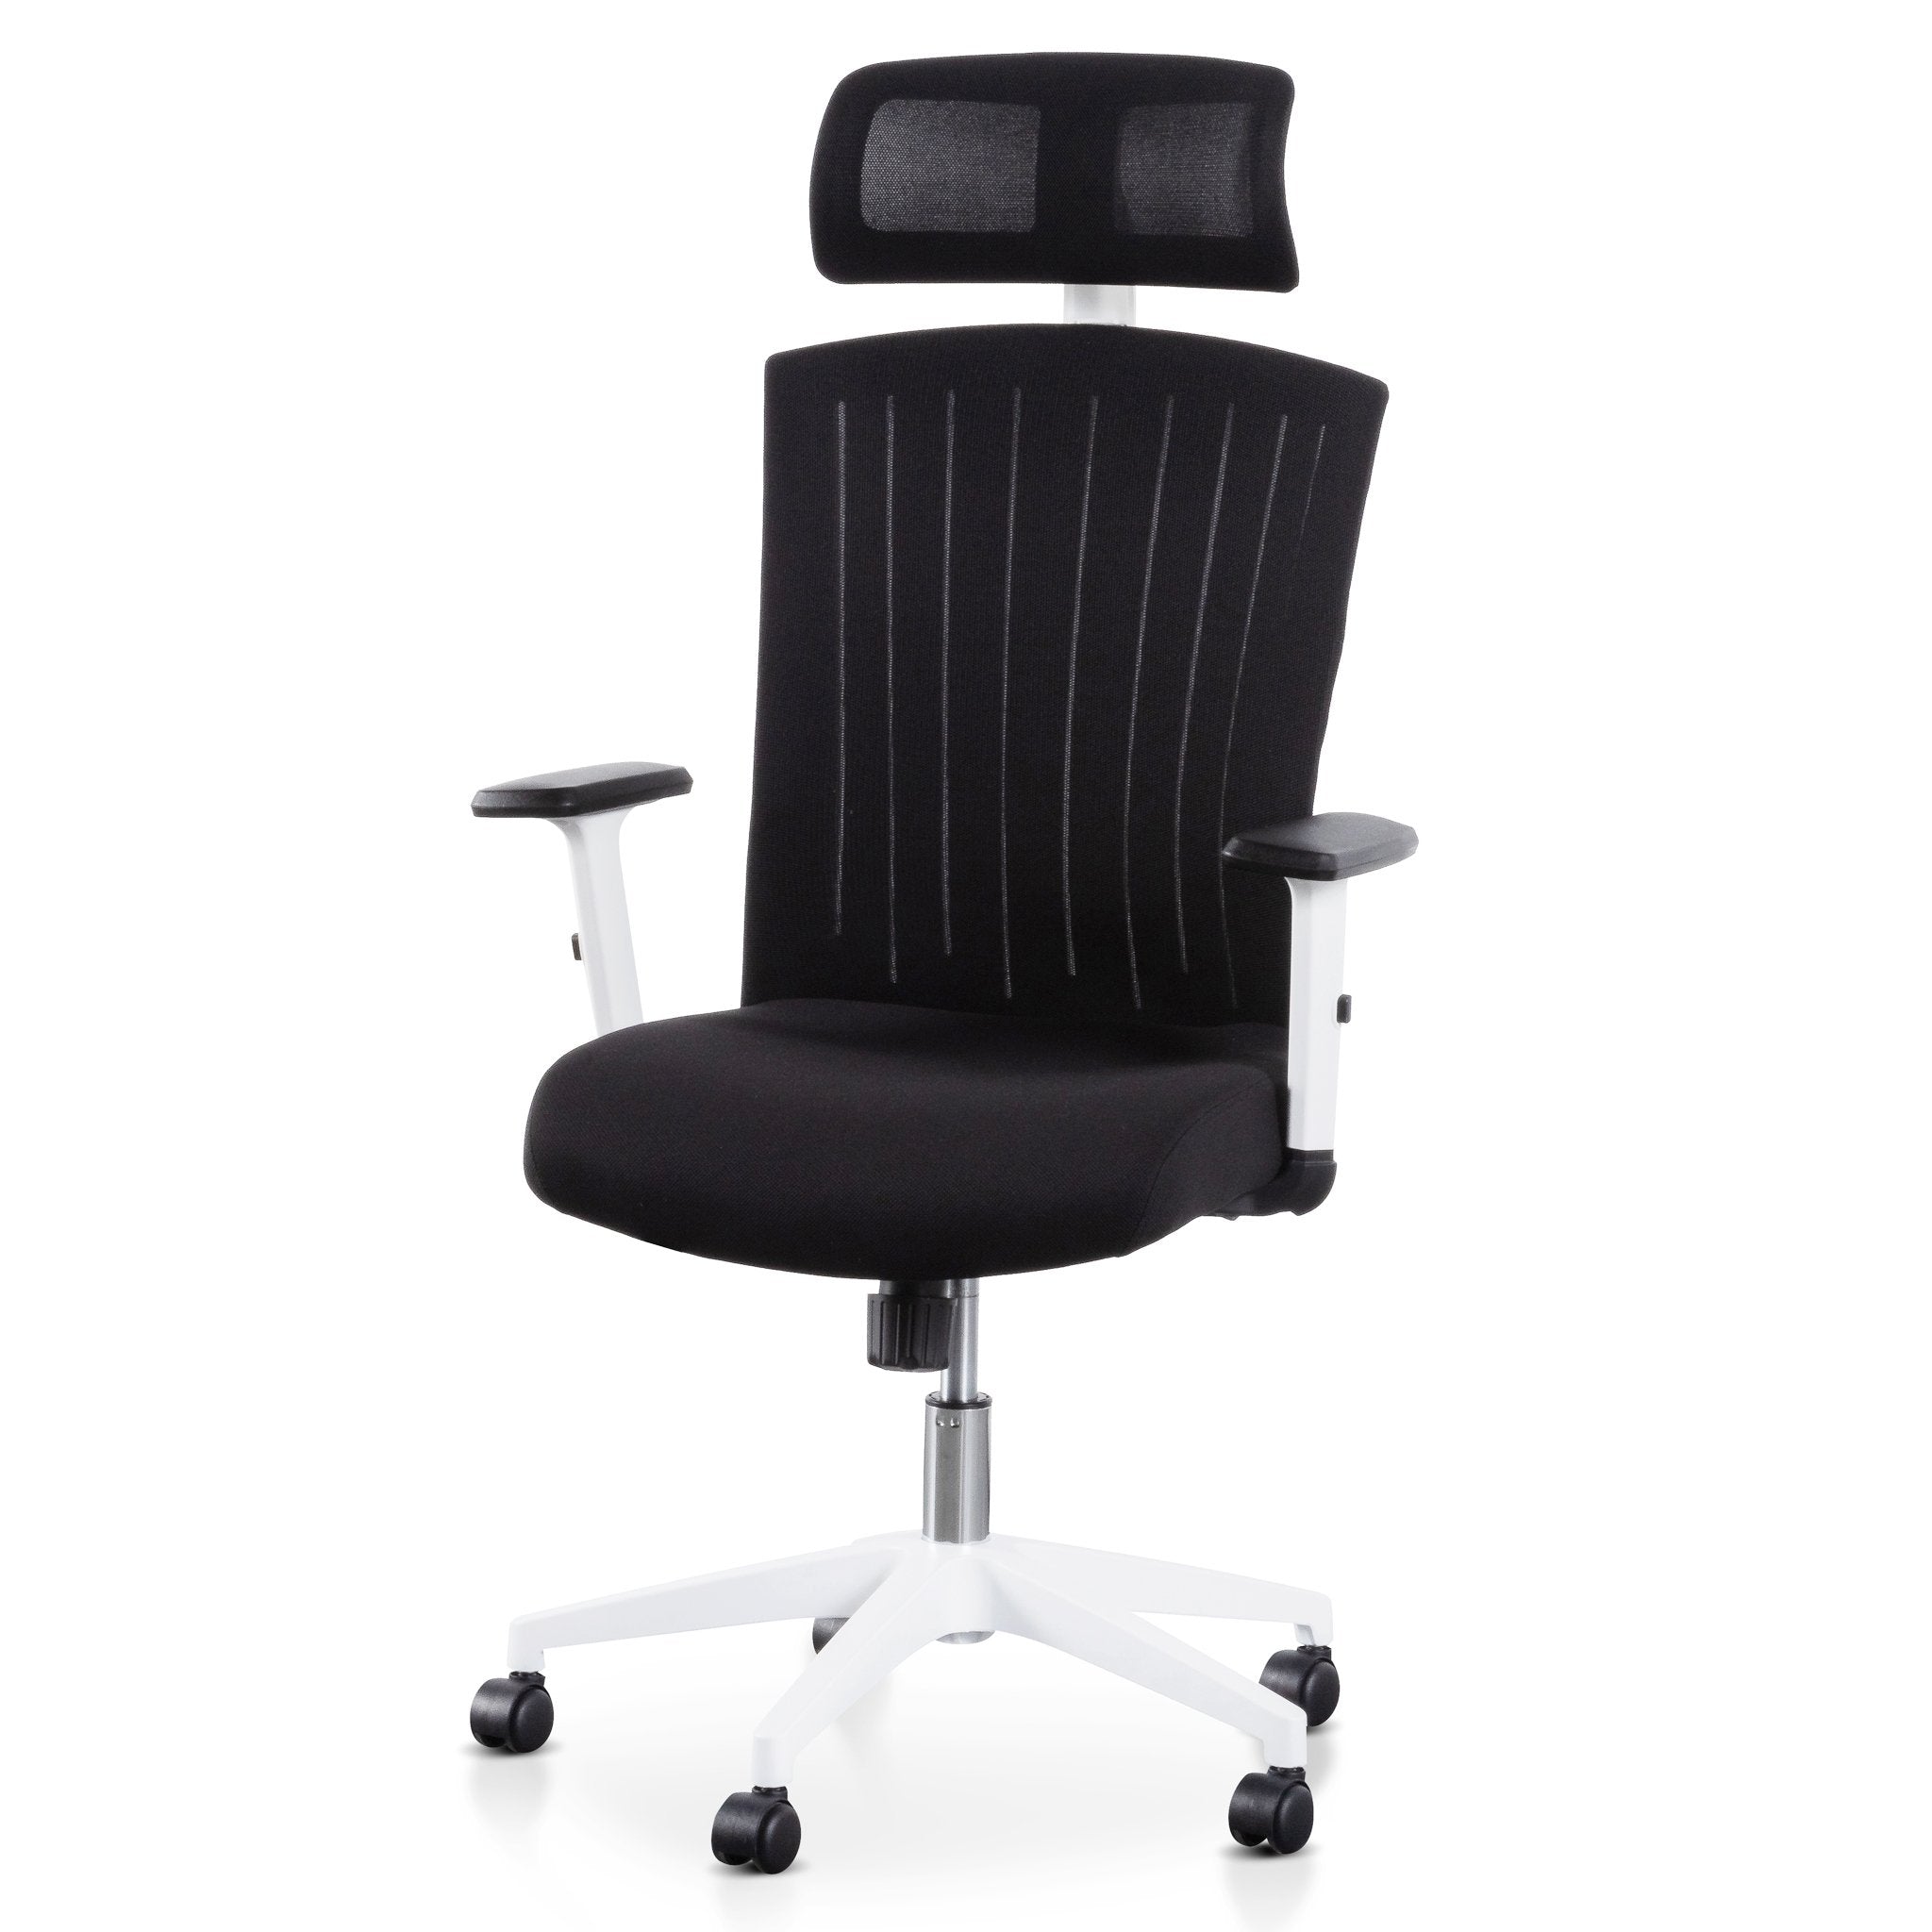 Mia Office Chair - Black and White